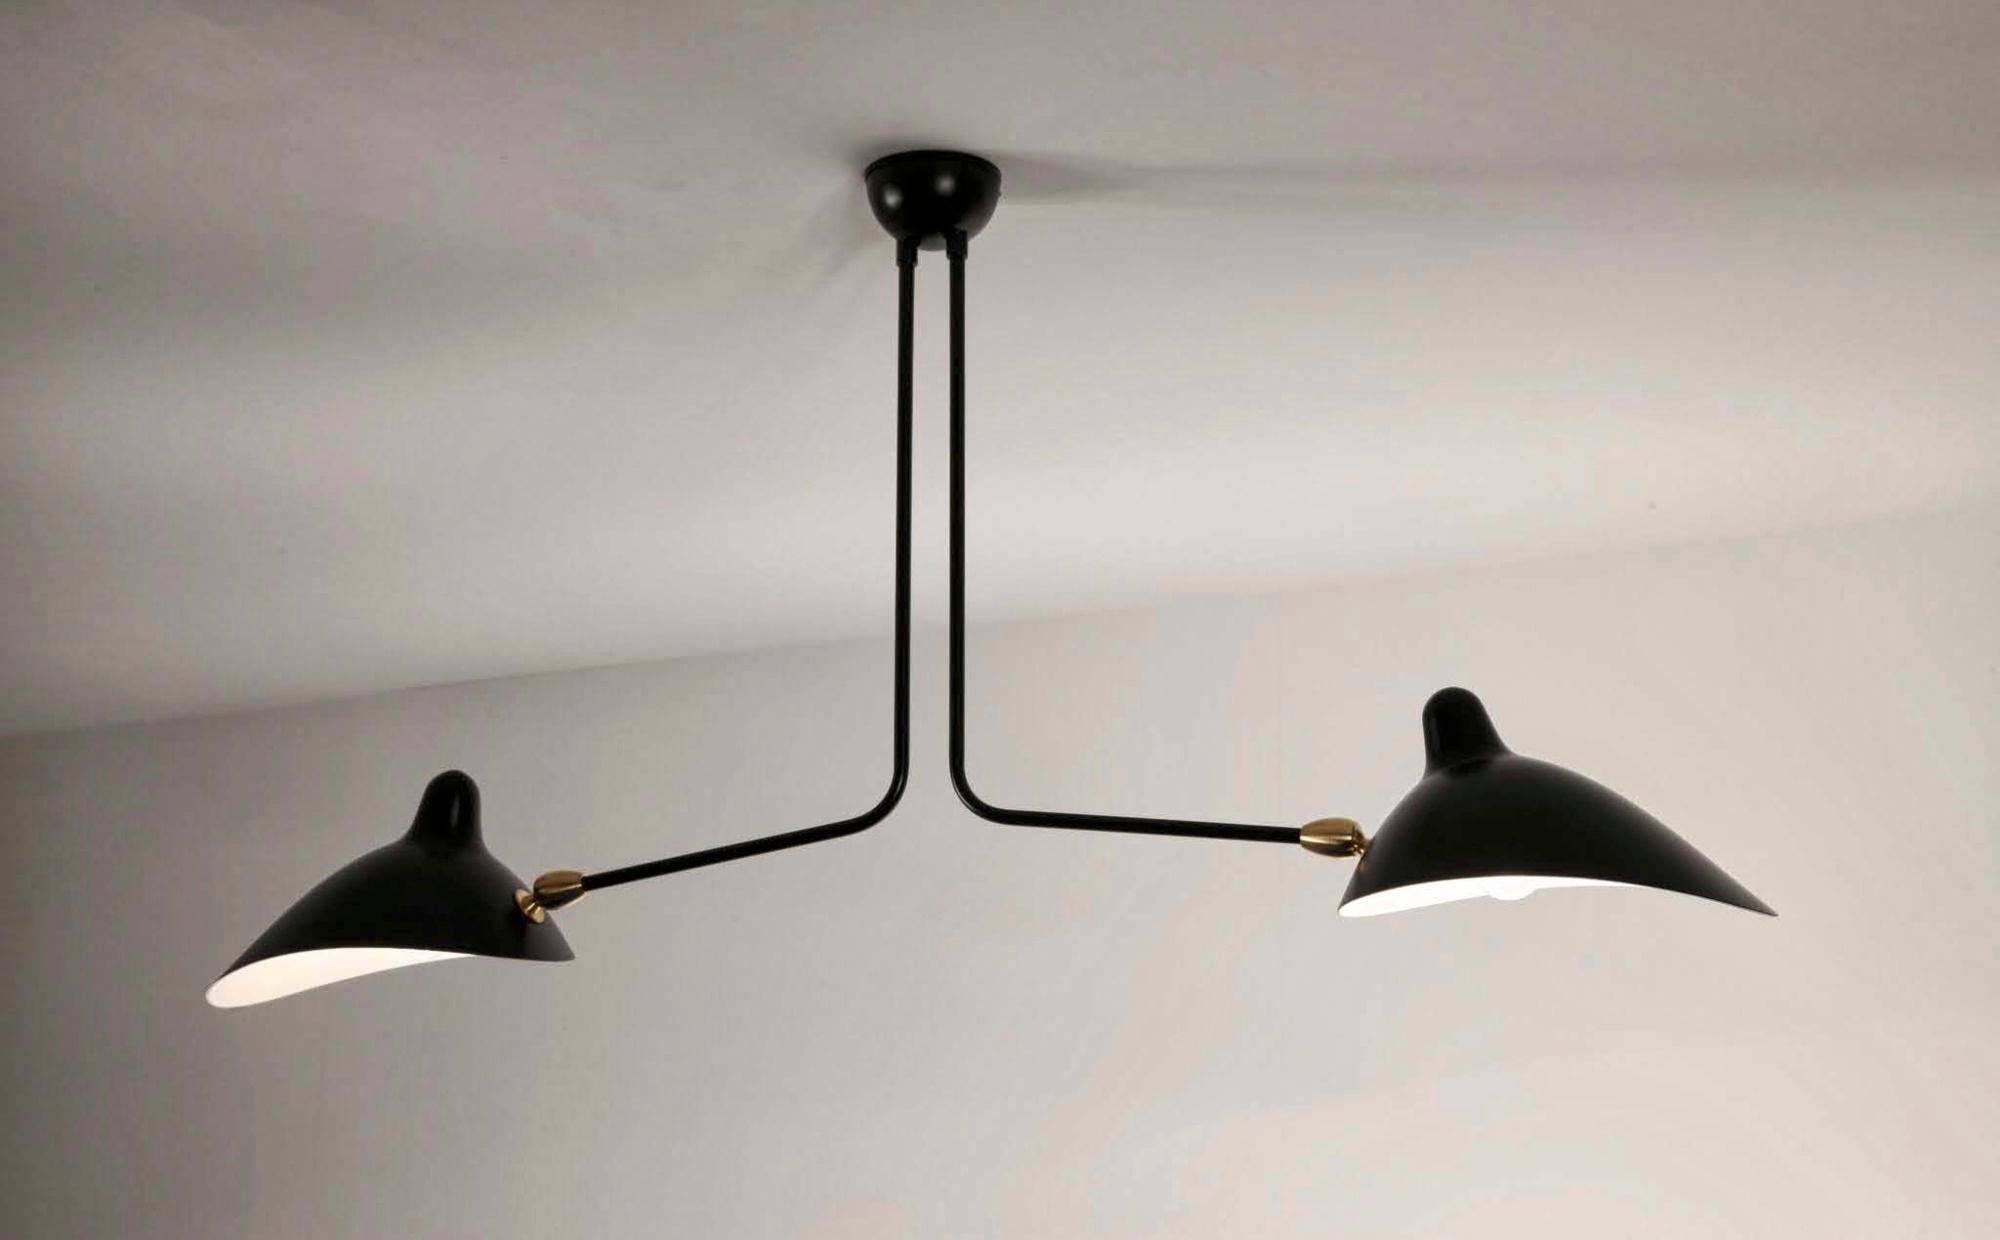 Simple and unique this ceiling lamp has two symmetrical curved arms which are fixed, with shades that can be rotated to any position. An elegant lamp with a small footprint that gives character to any room. 

Available in black or white.

You